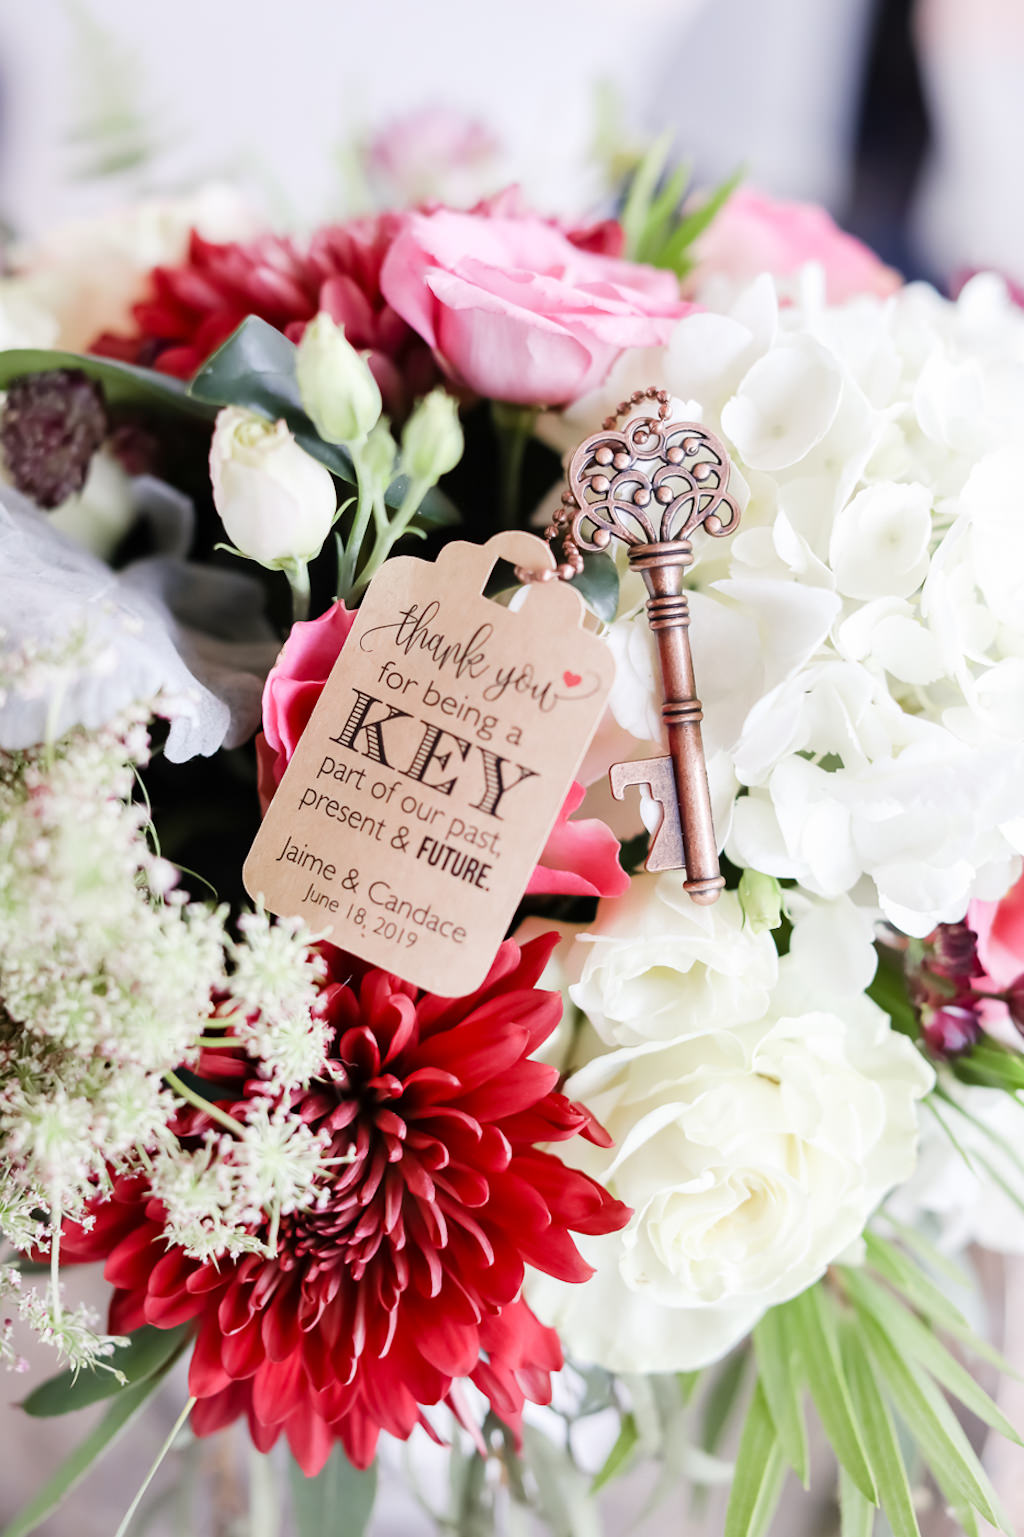 Colorful French Country Inspired Burgundy, Red, Pink, And White Hyandrangea Floral Bridal Bouquet and Custom Key Wedding Favor | Tampa Bay Wedding Photographer Lifelong Photography Studio